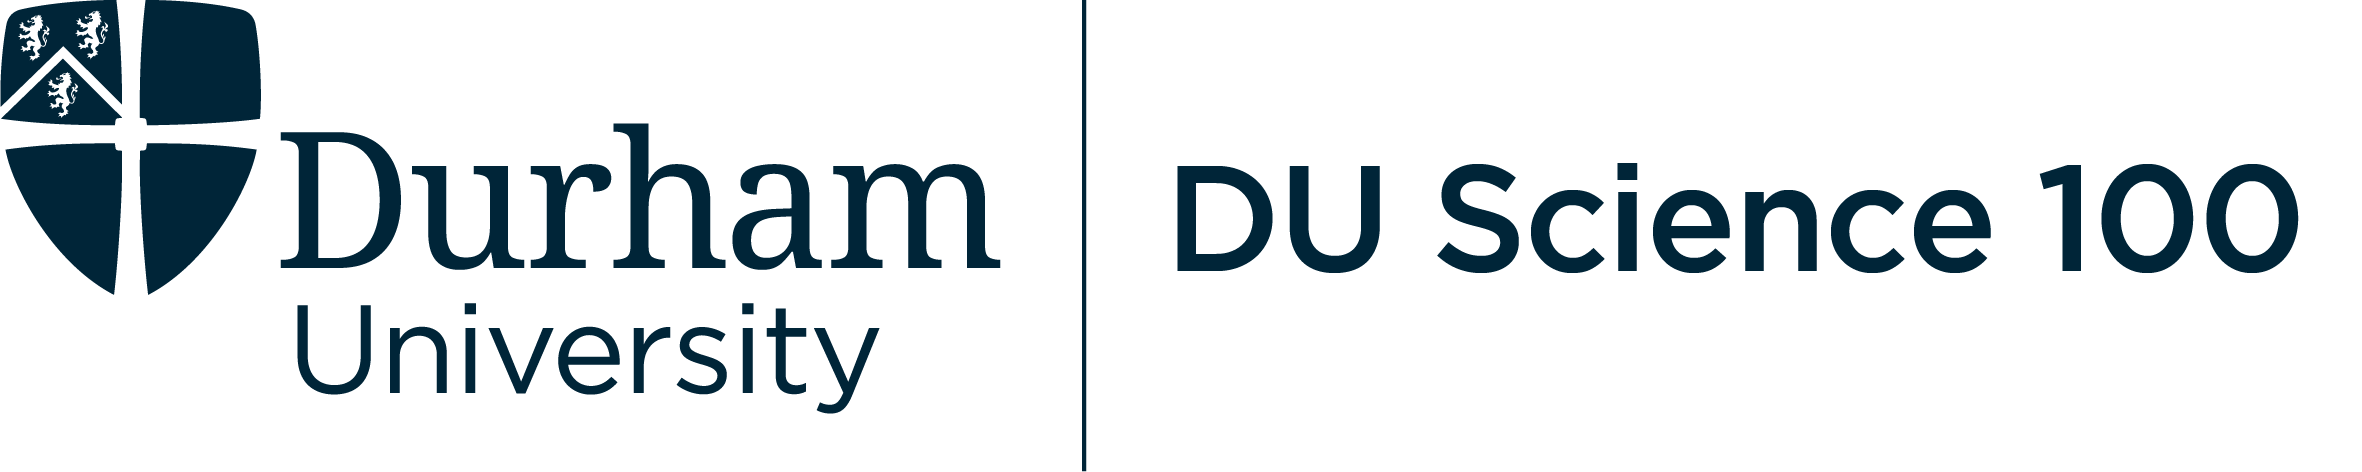 DU Science 100 words as a logo